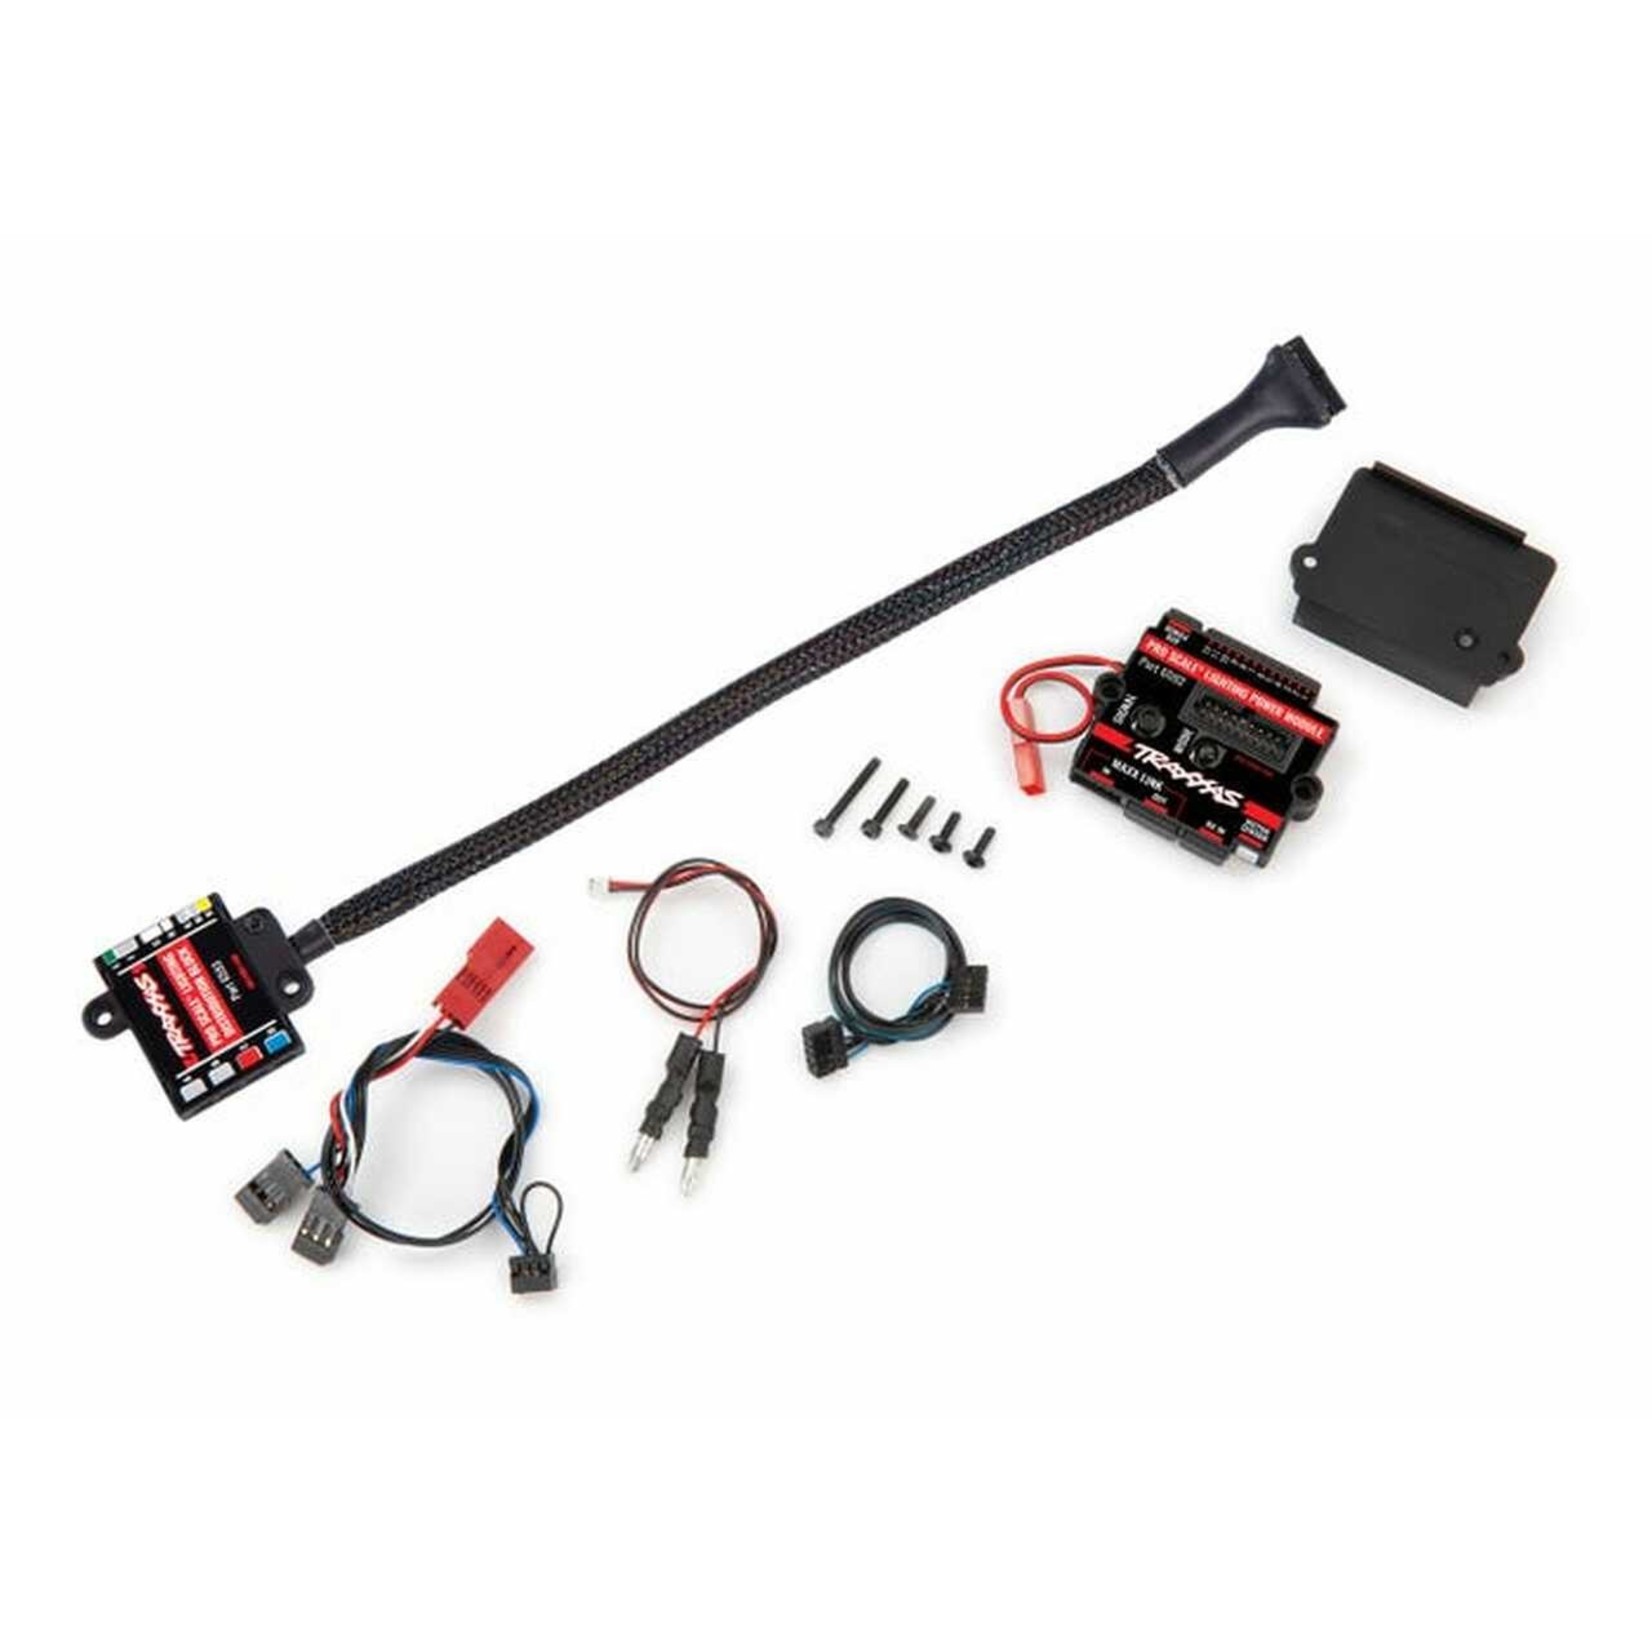 Traxxas Pro Scale Adv. Lighting Control System